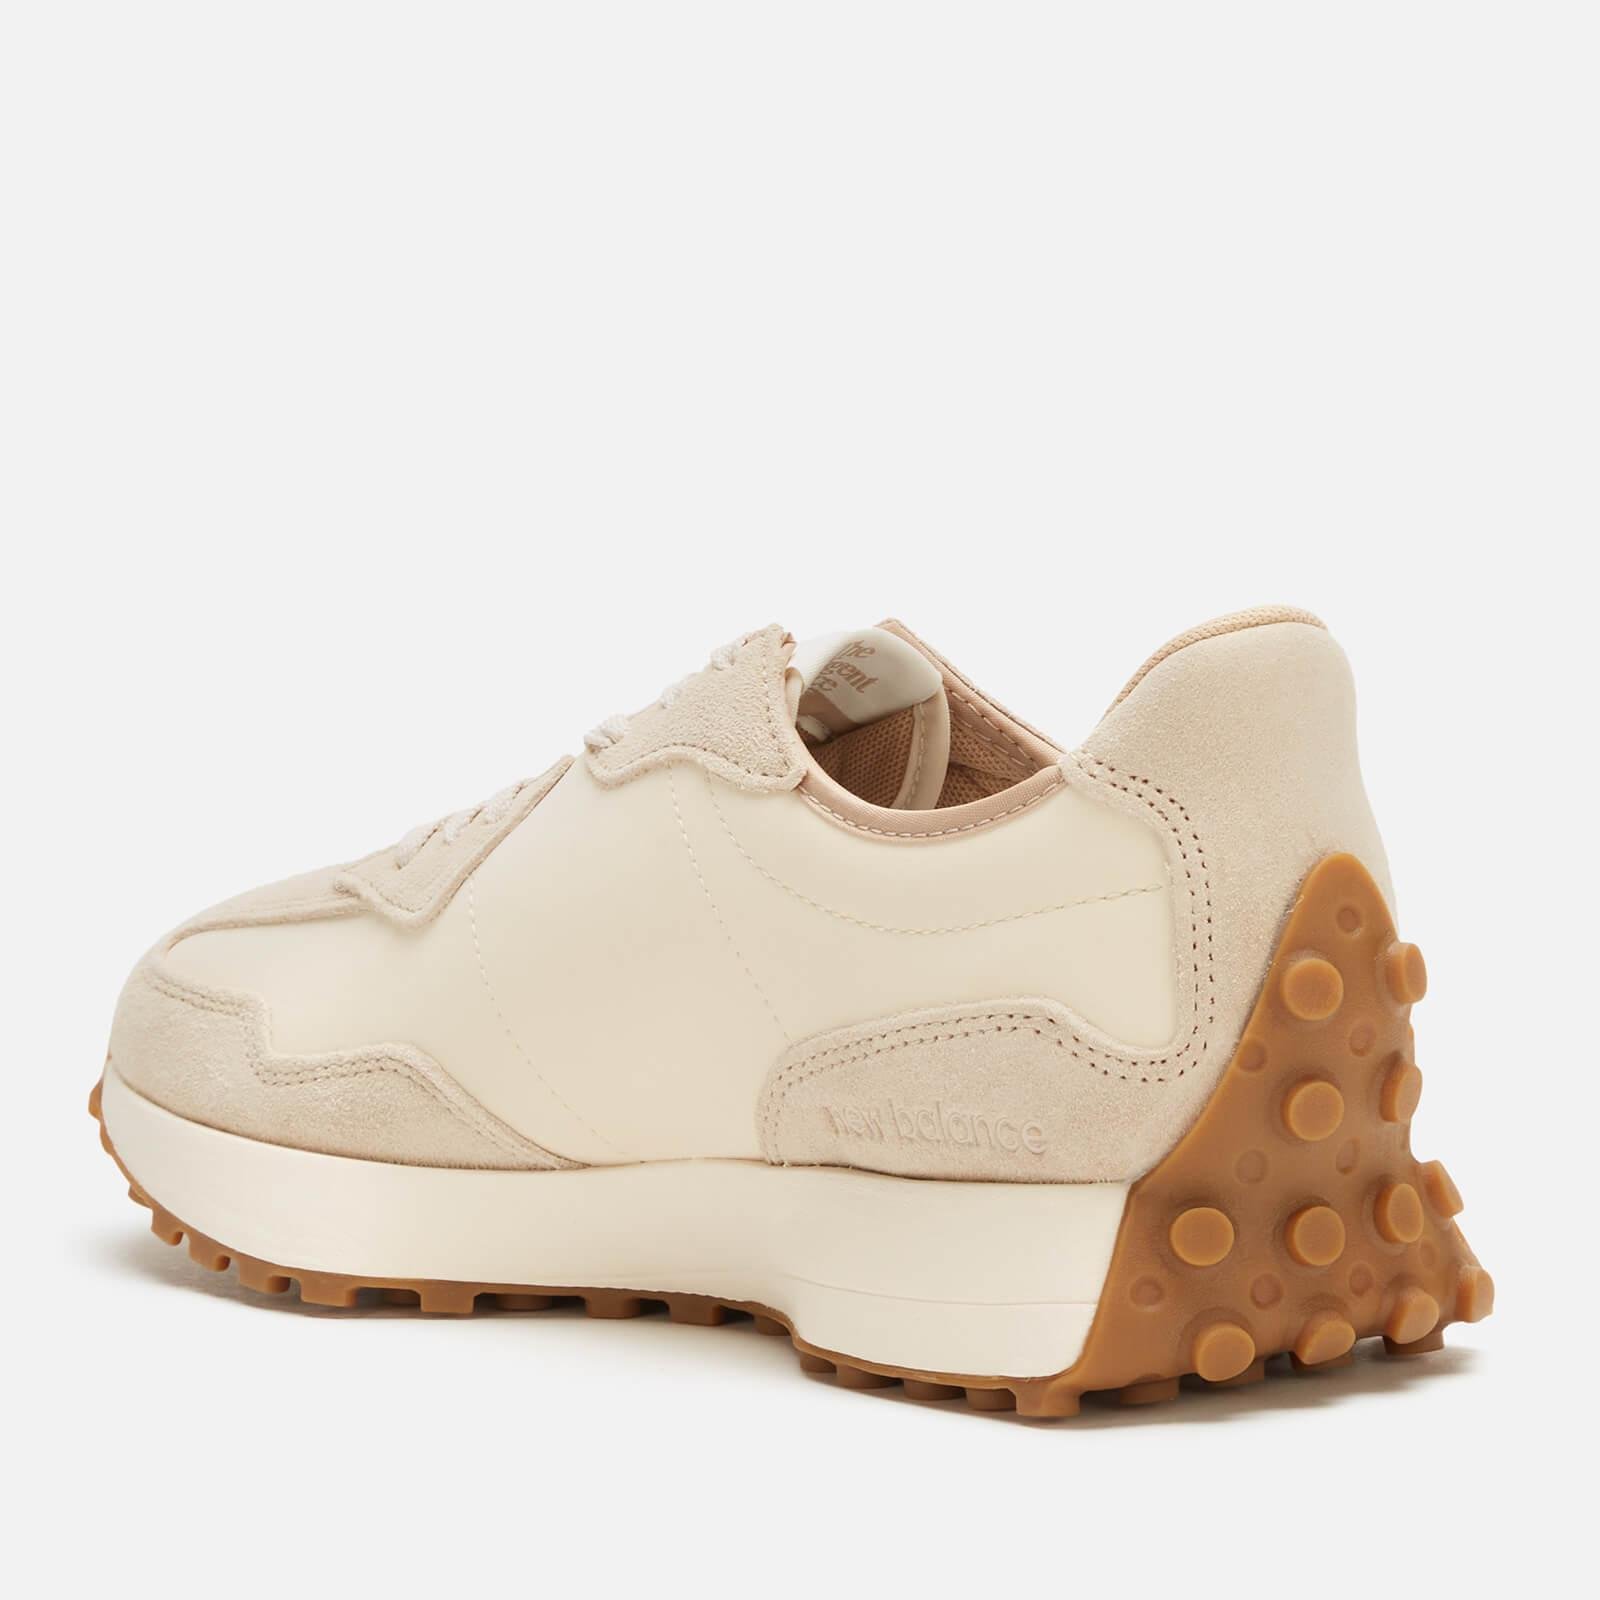 New Balance 327 Trainers in Beige (Natural) | Lyst